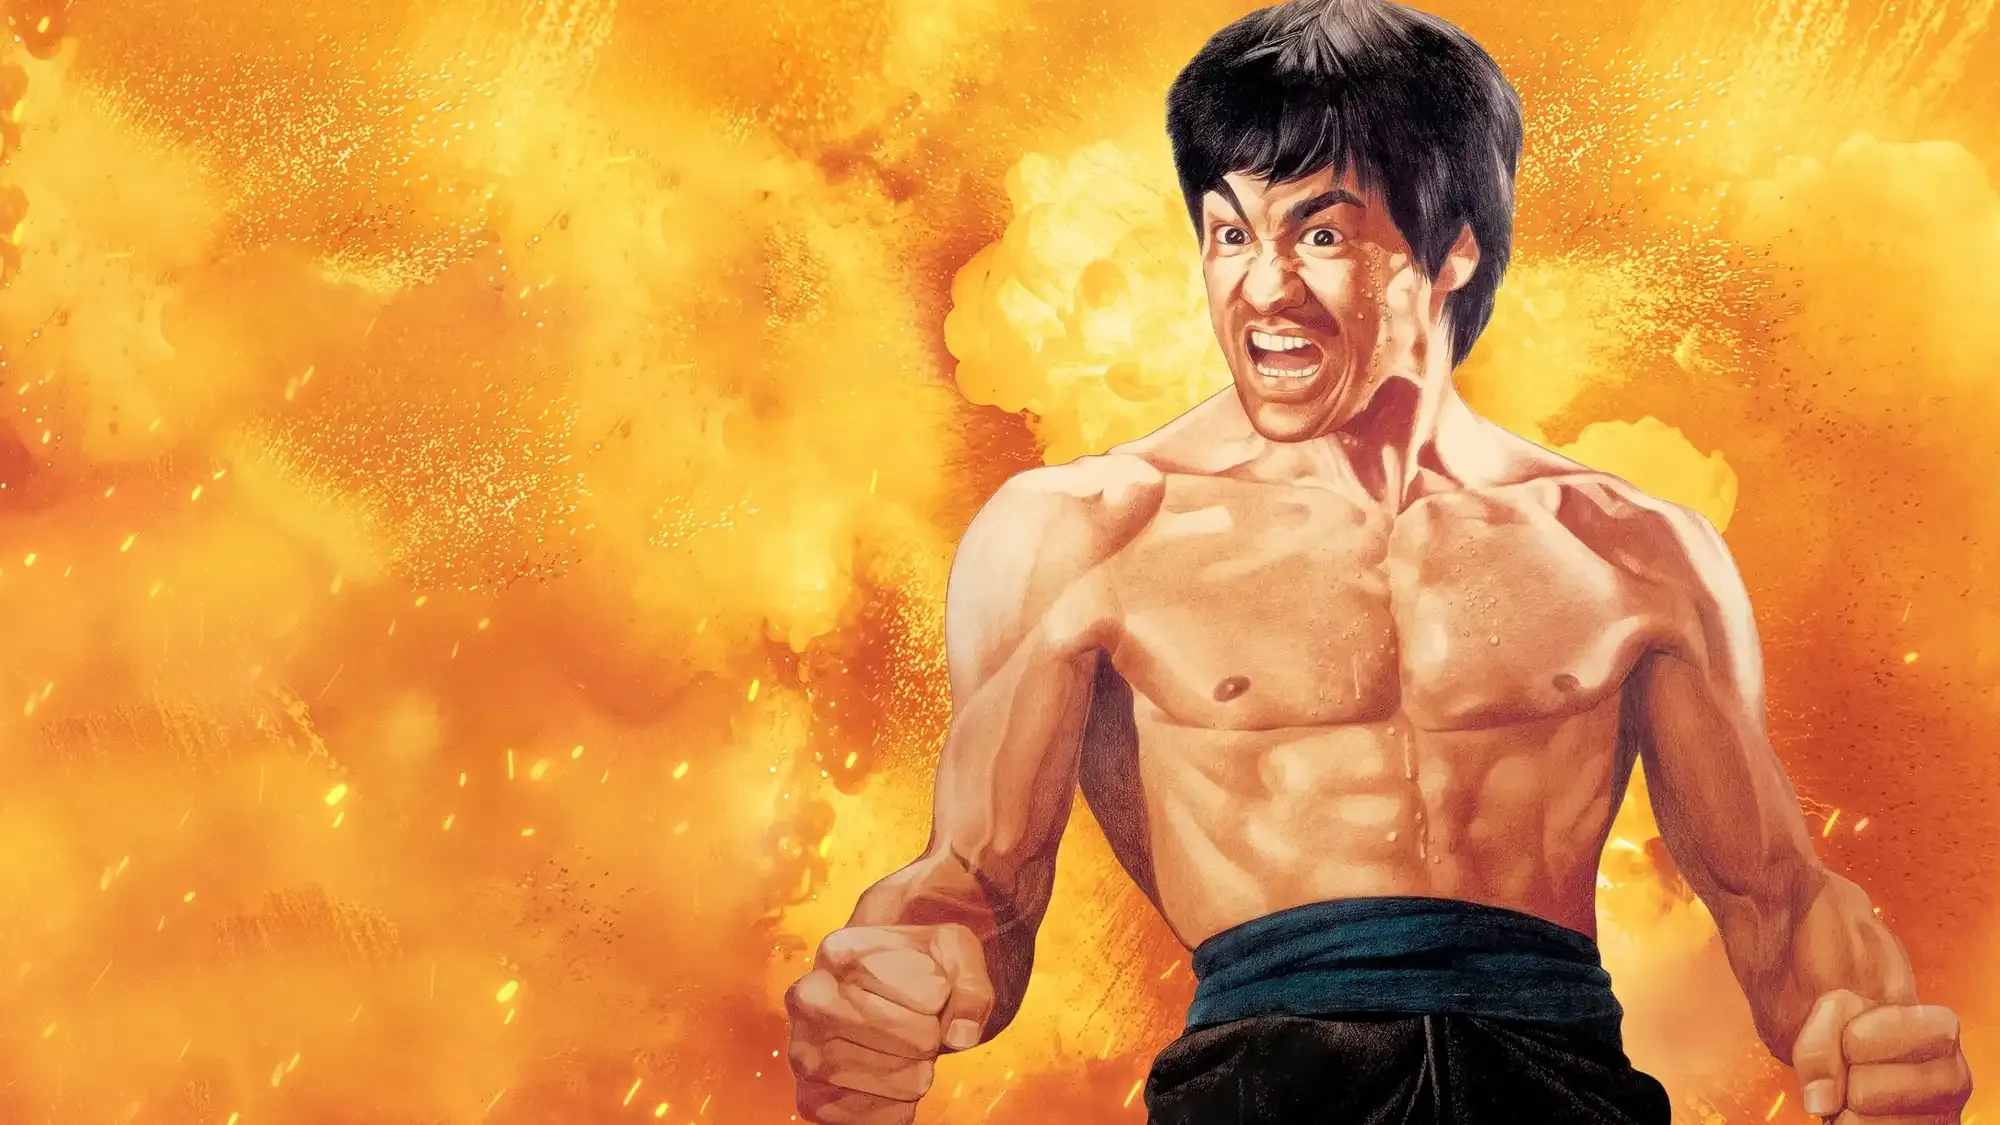 Fist of Fury movie review